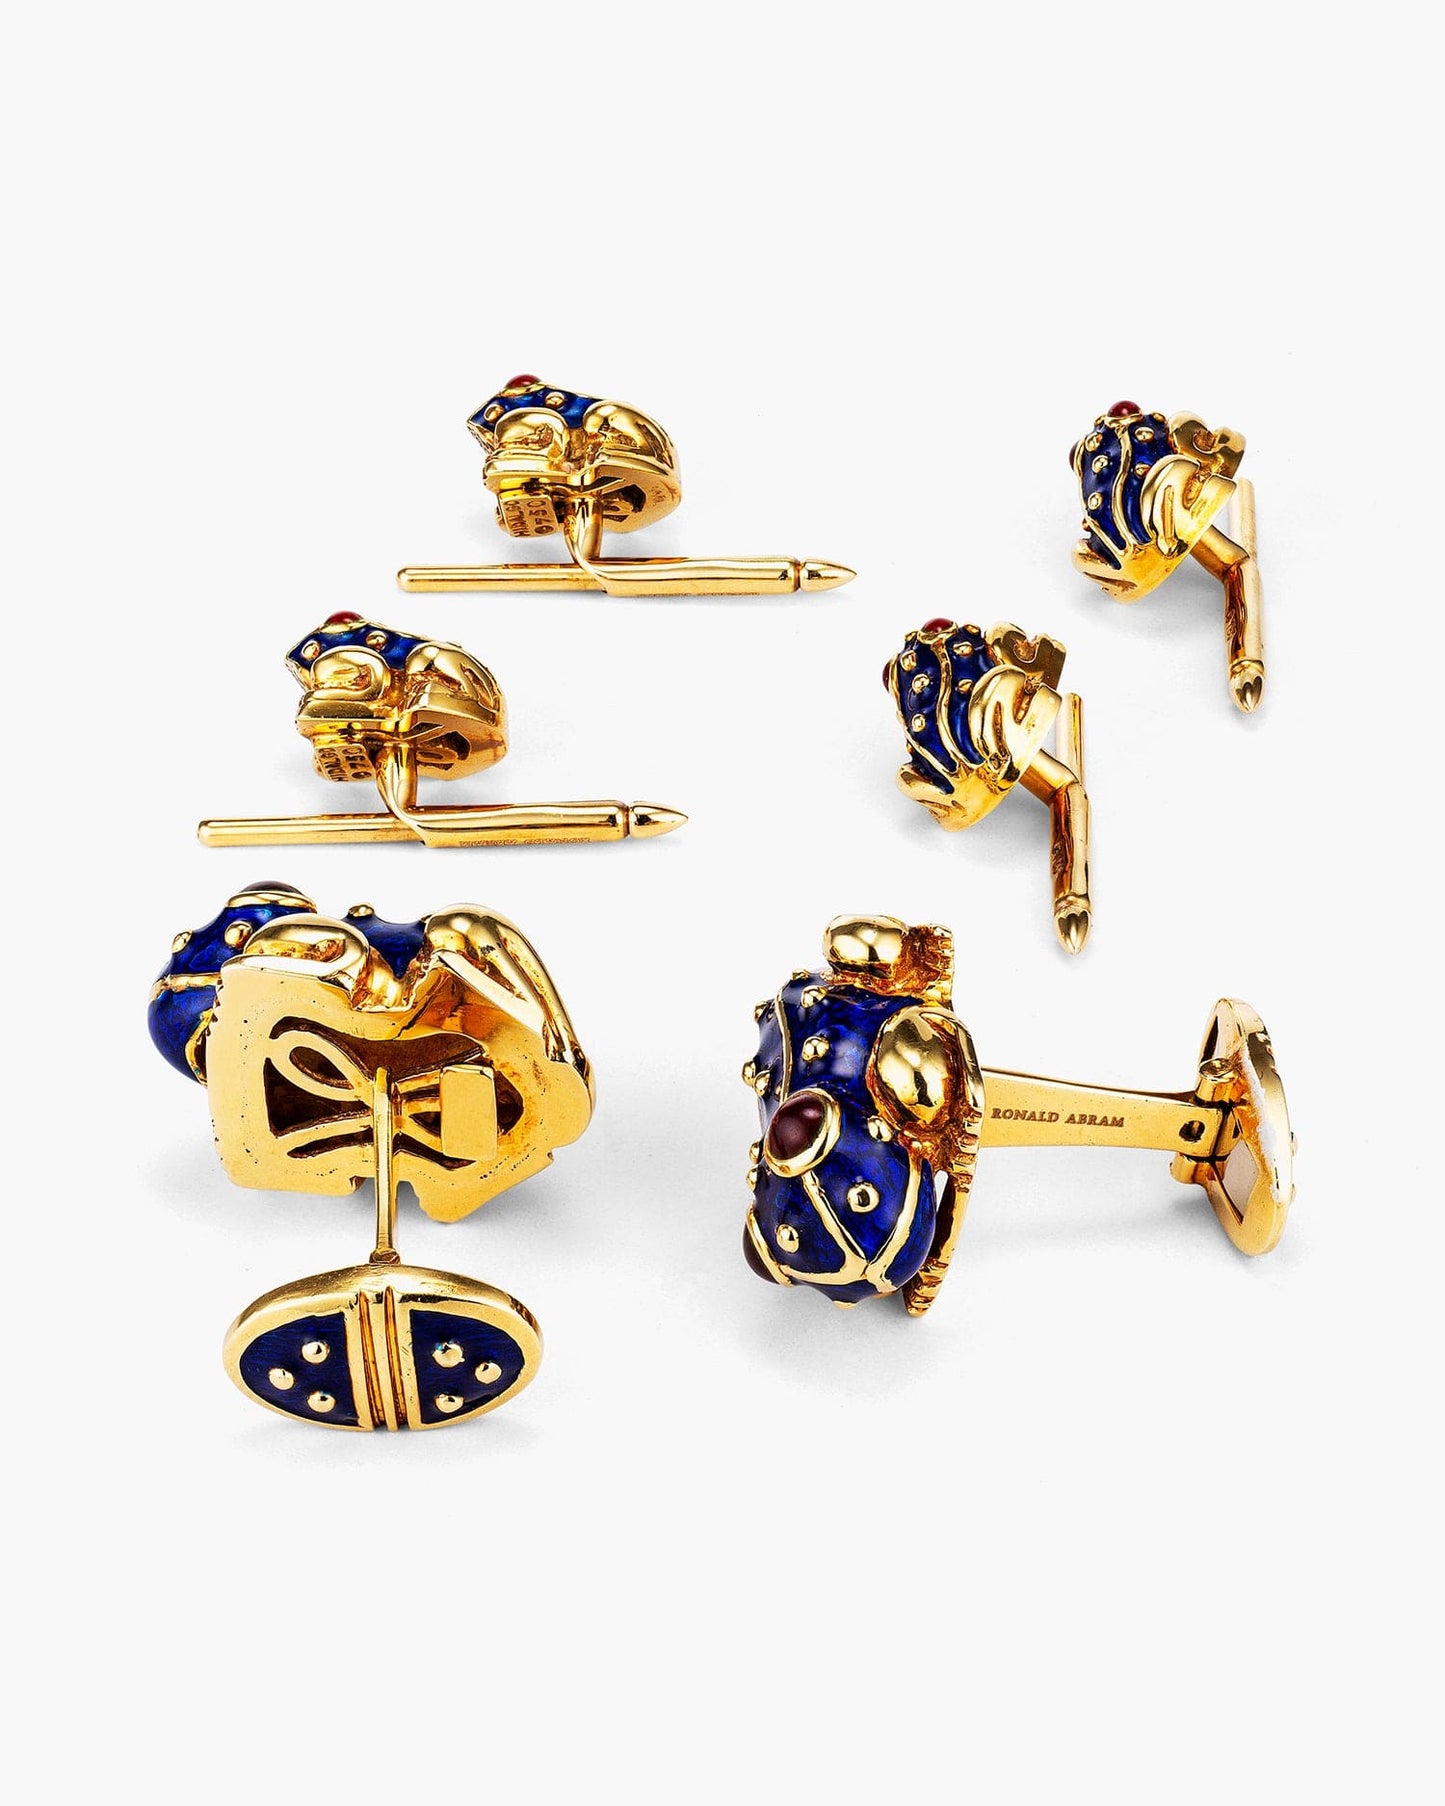 Blue Enamel and Ruby Toad Cufflinks and Stud Set